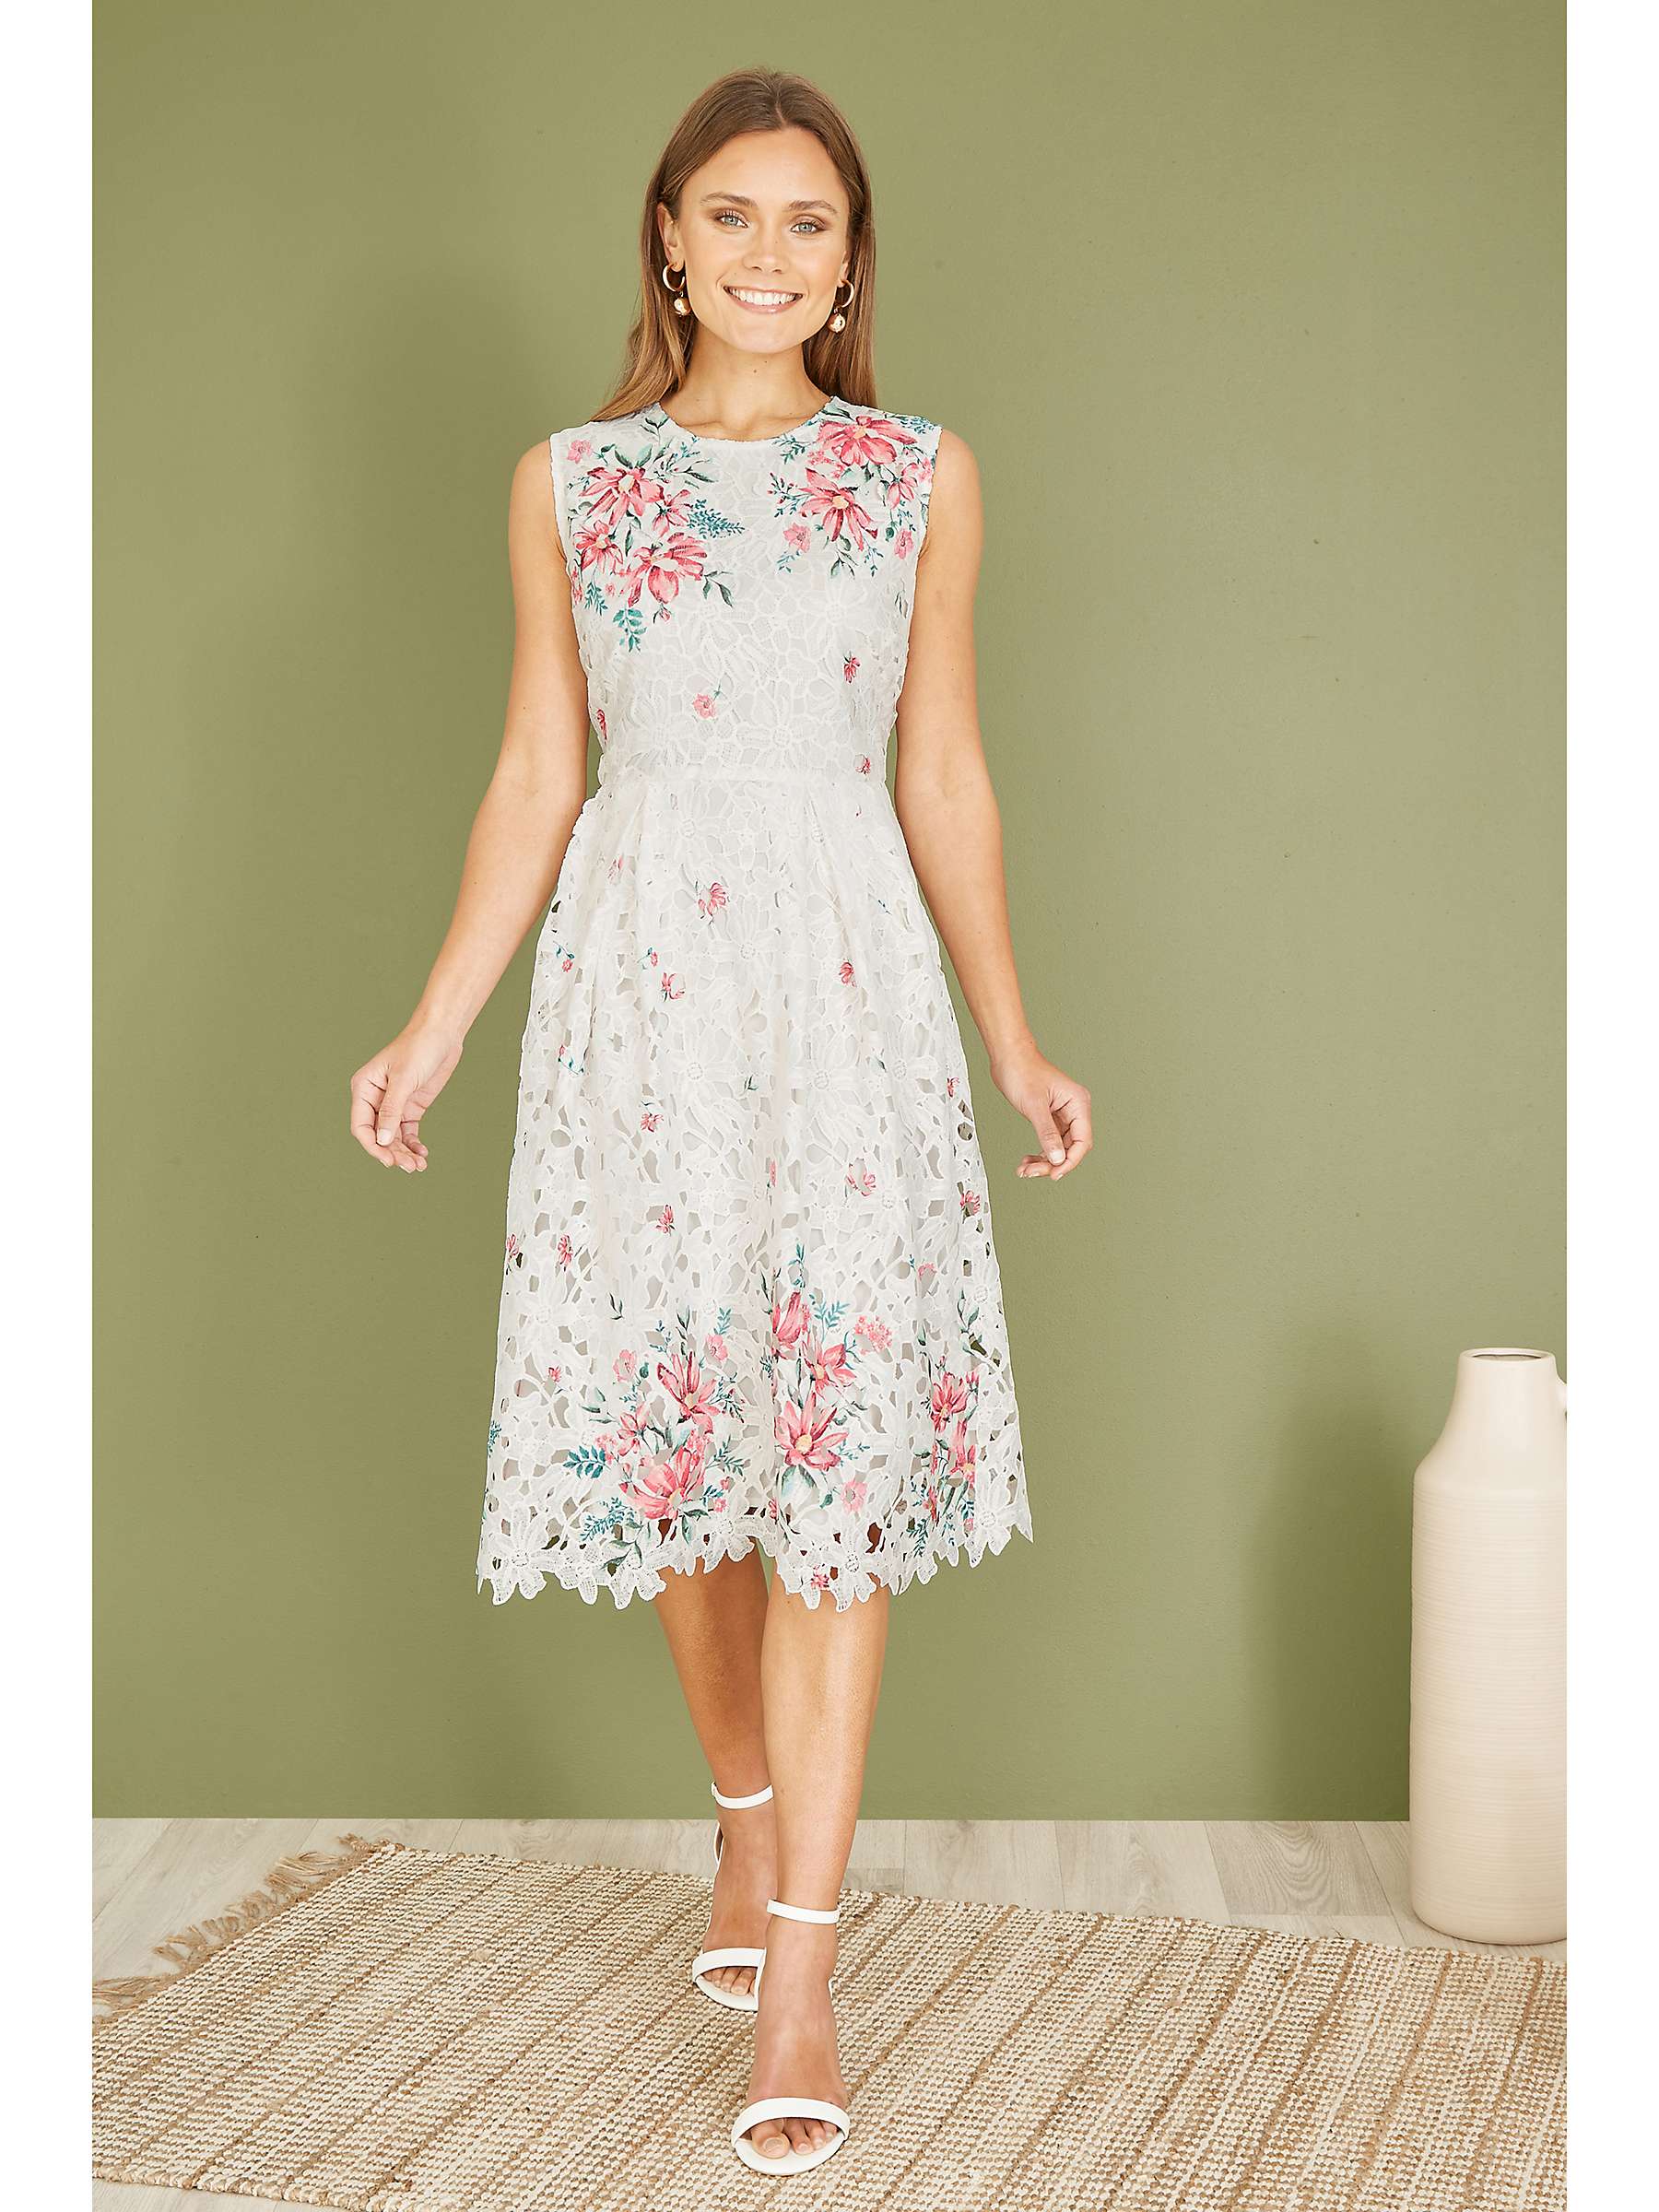 Buy Yumi Lace Floral Knee Length Dress, Ivory/Multi Online at johnlewis.com